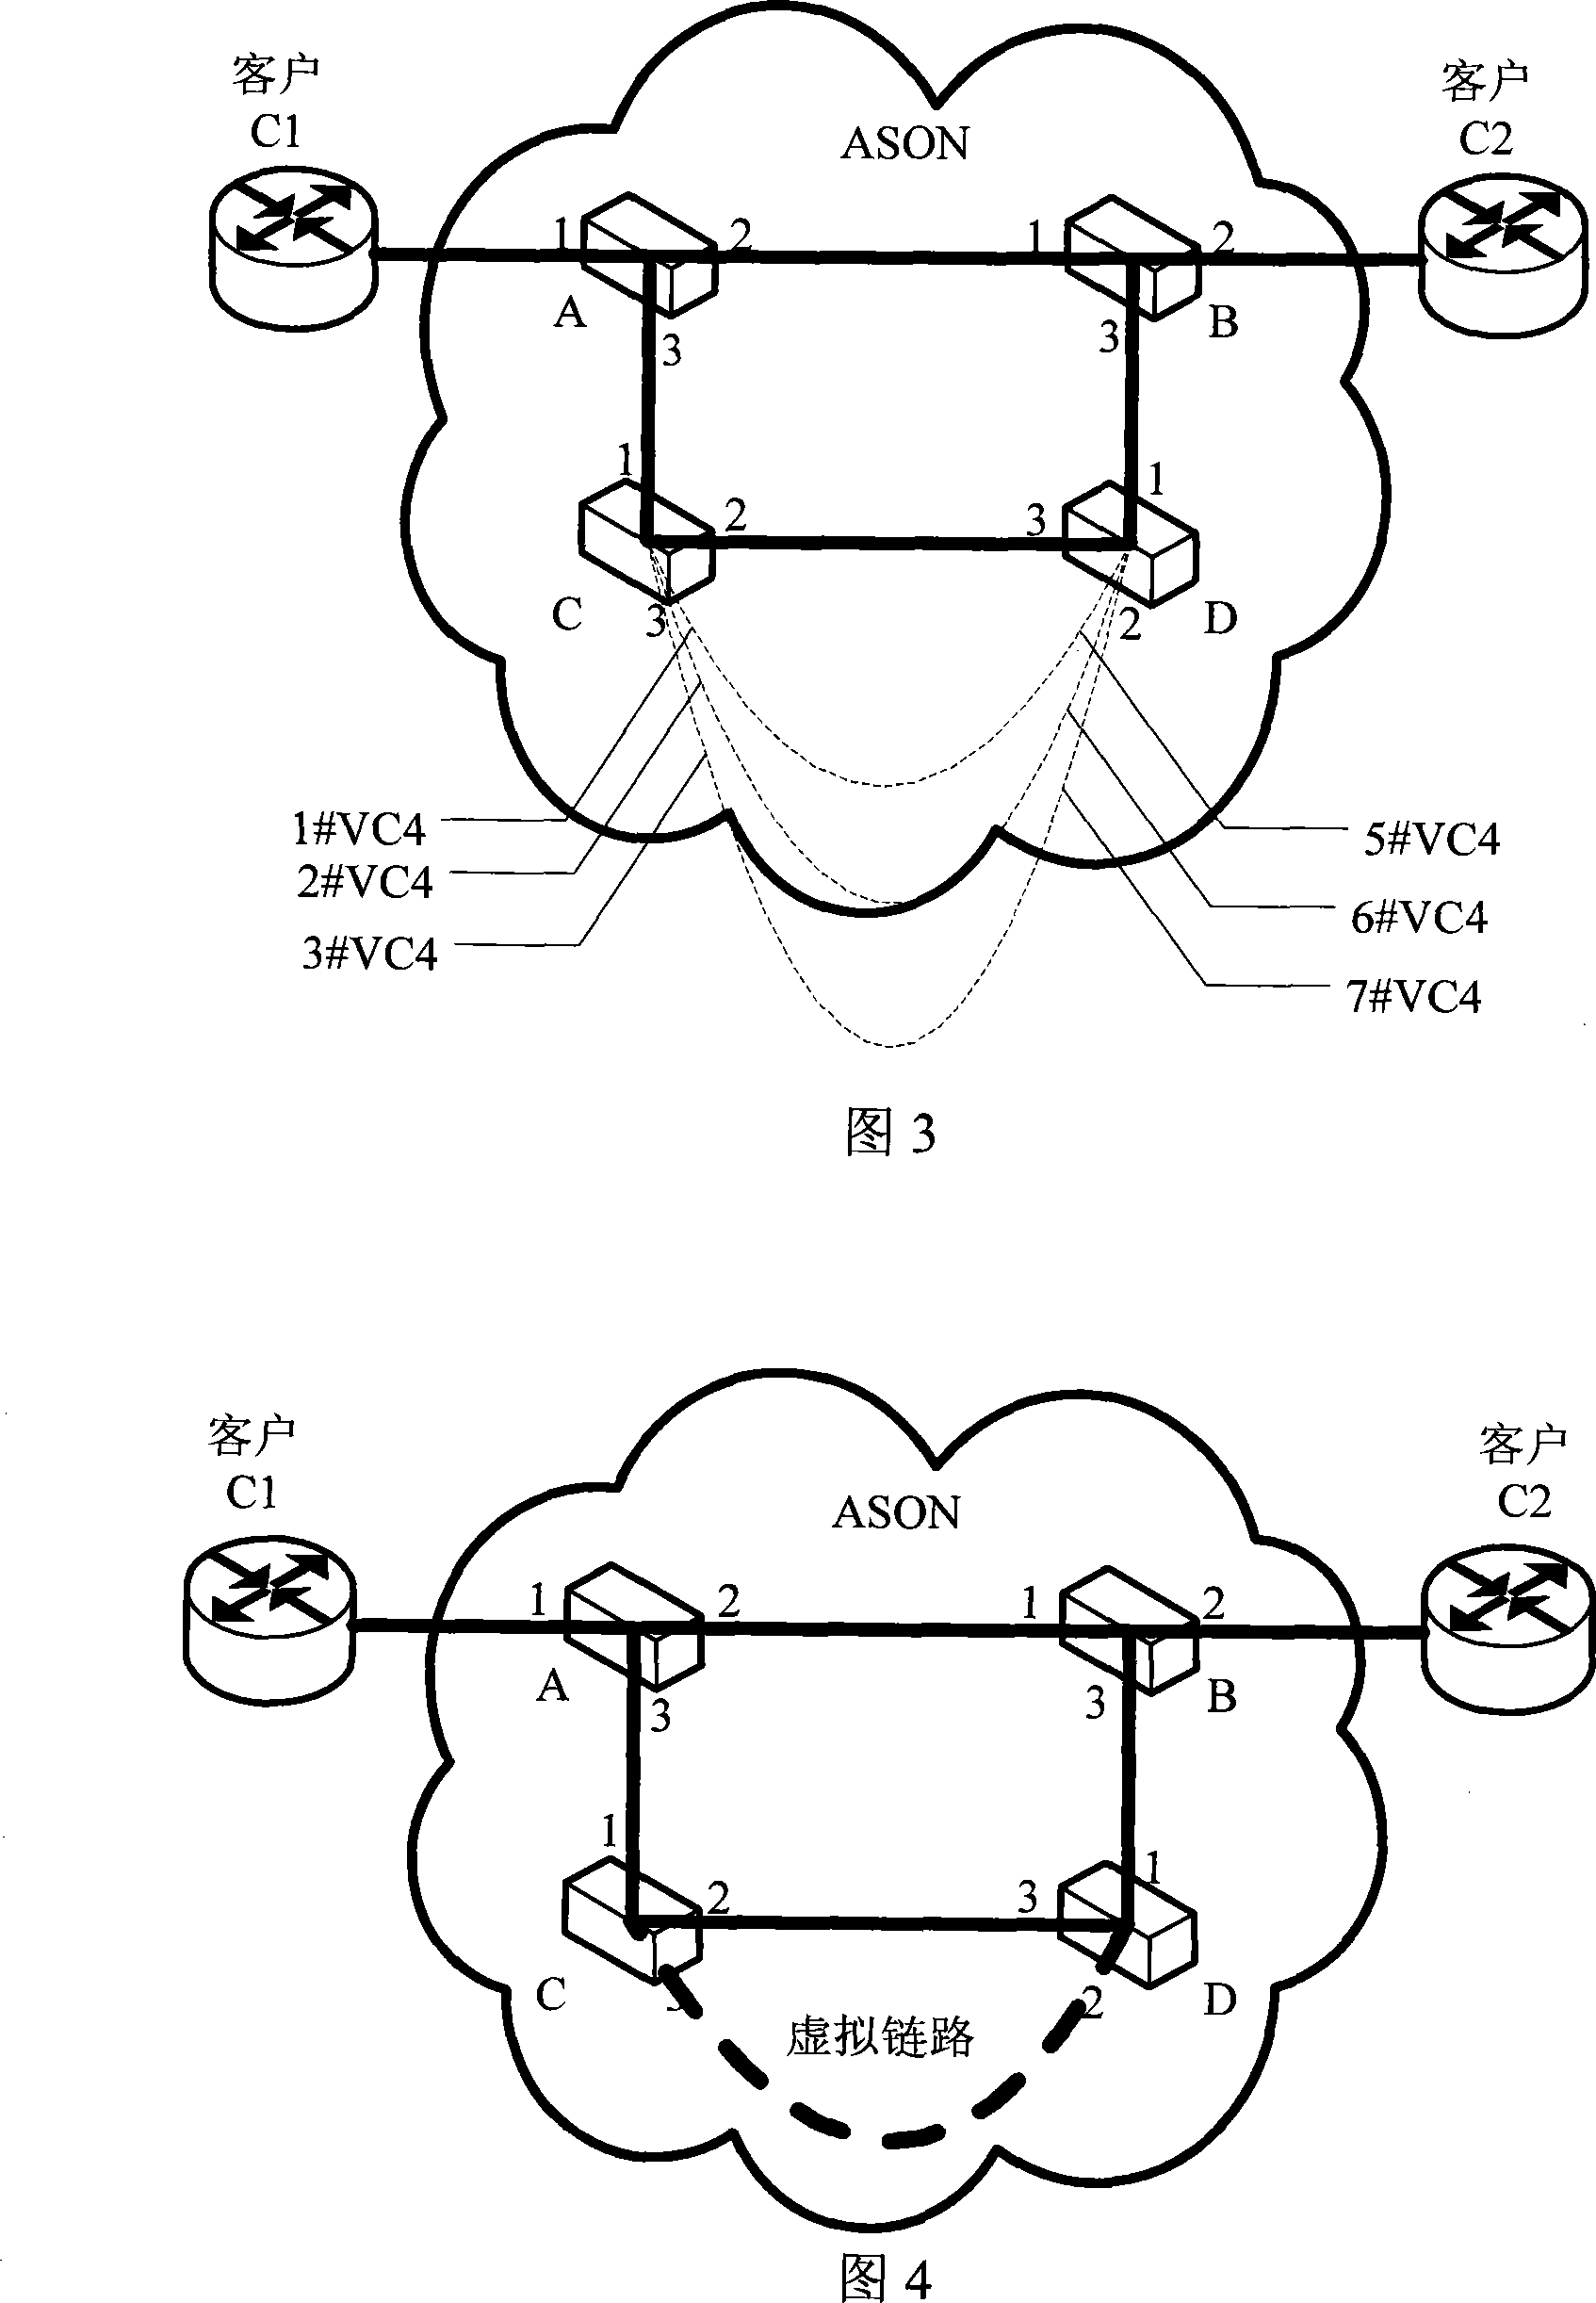 Automatic exchange optical network and traditional network interconnecting method